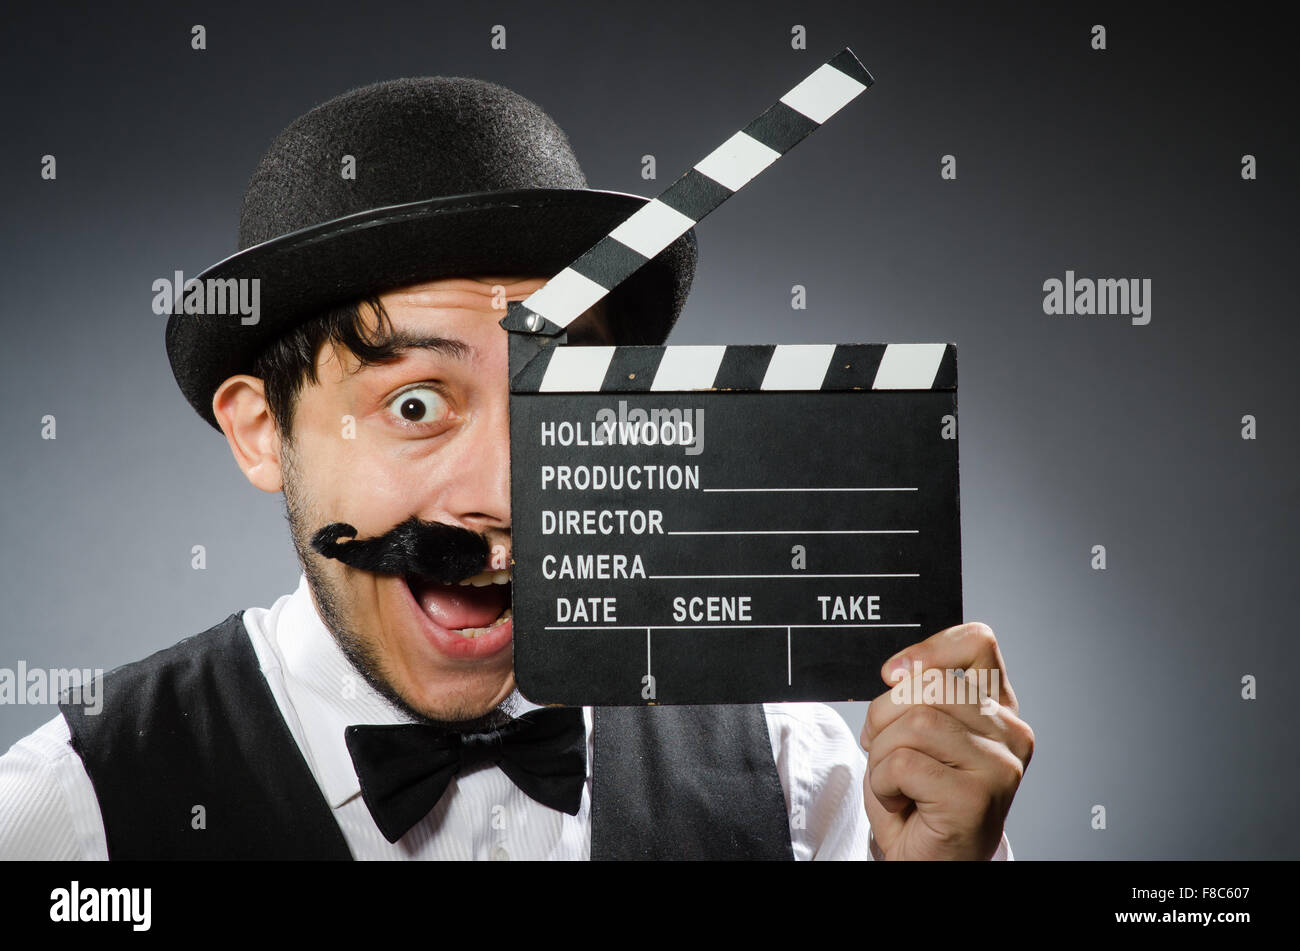 Funny man with movie clapper board Stock Photo - Alamy